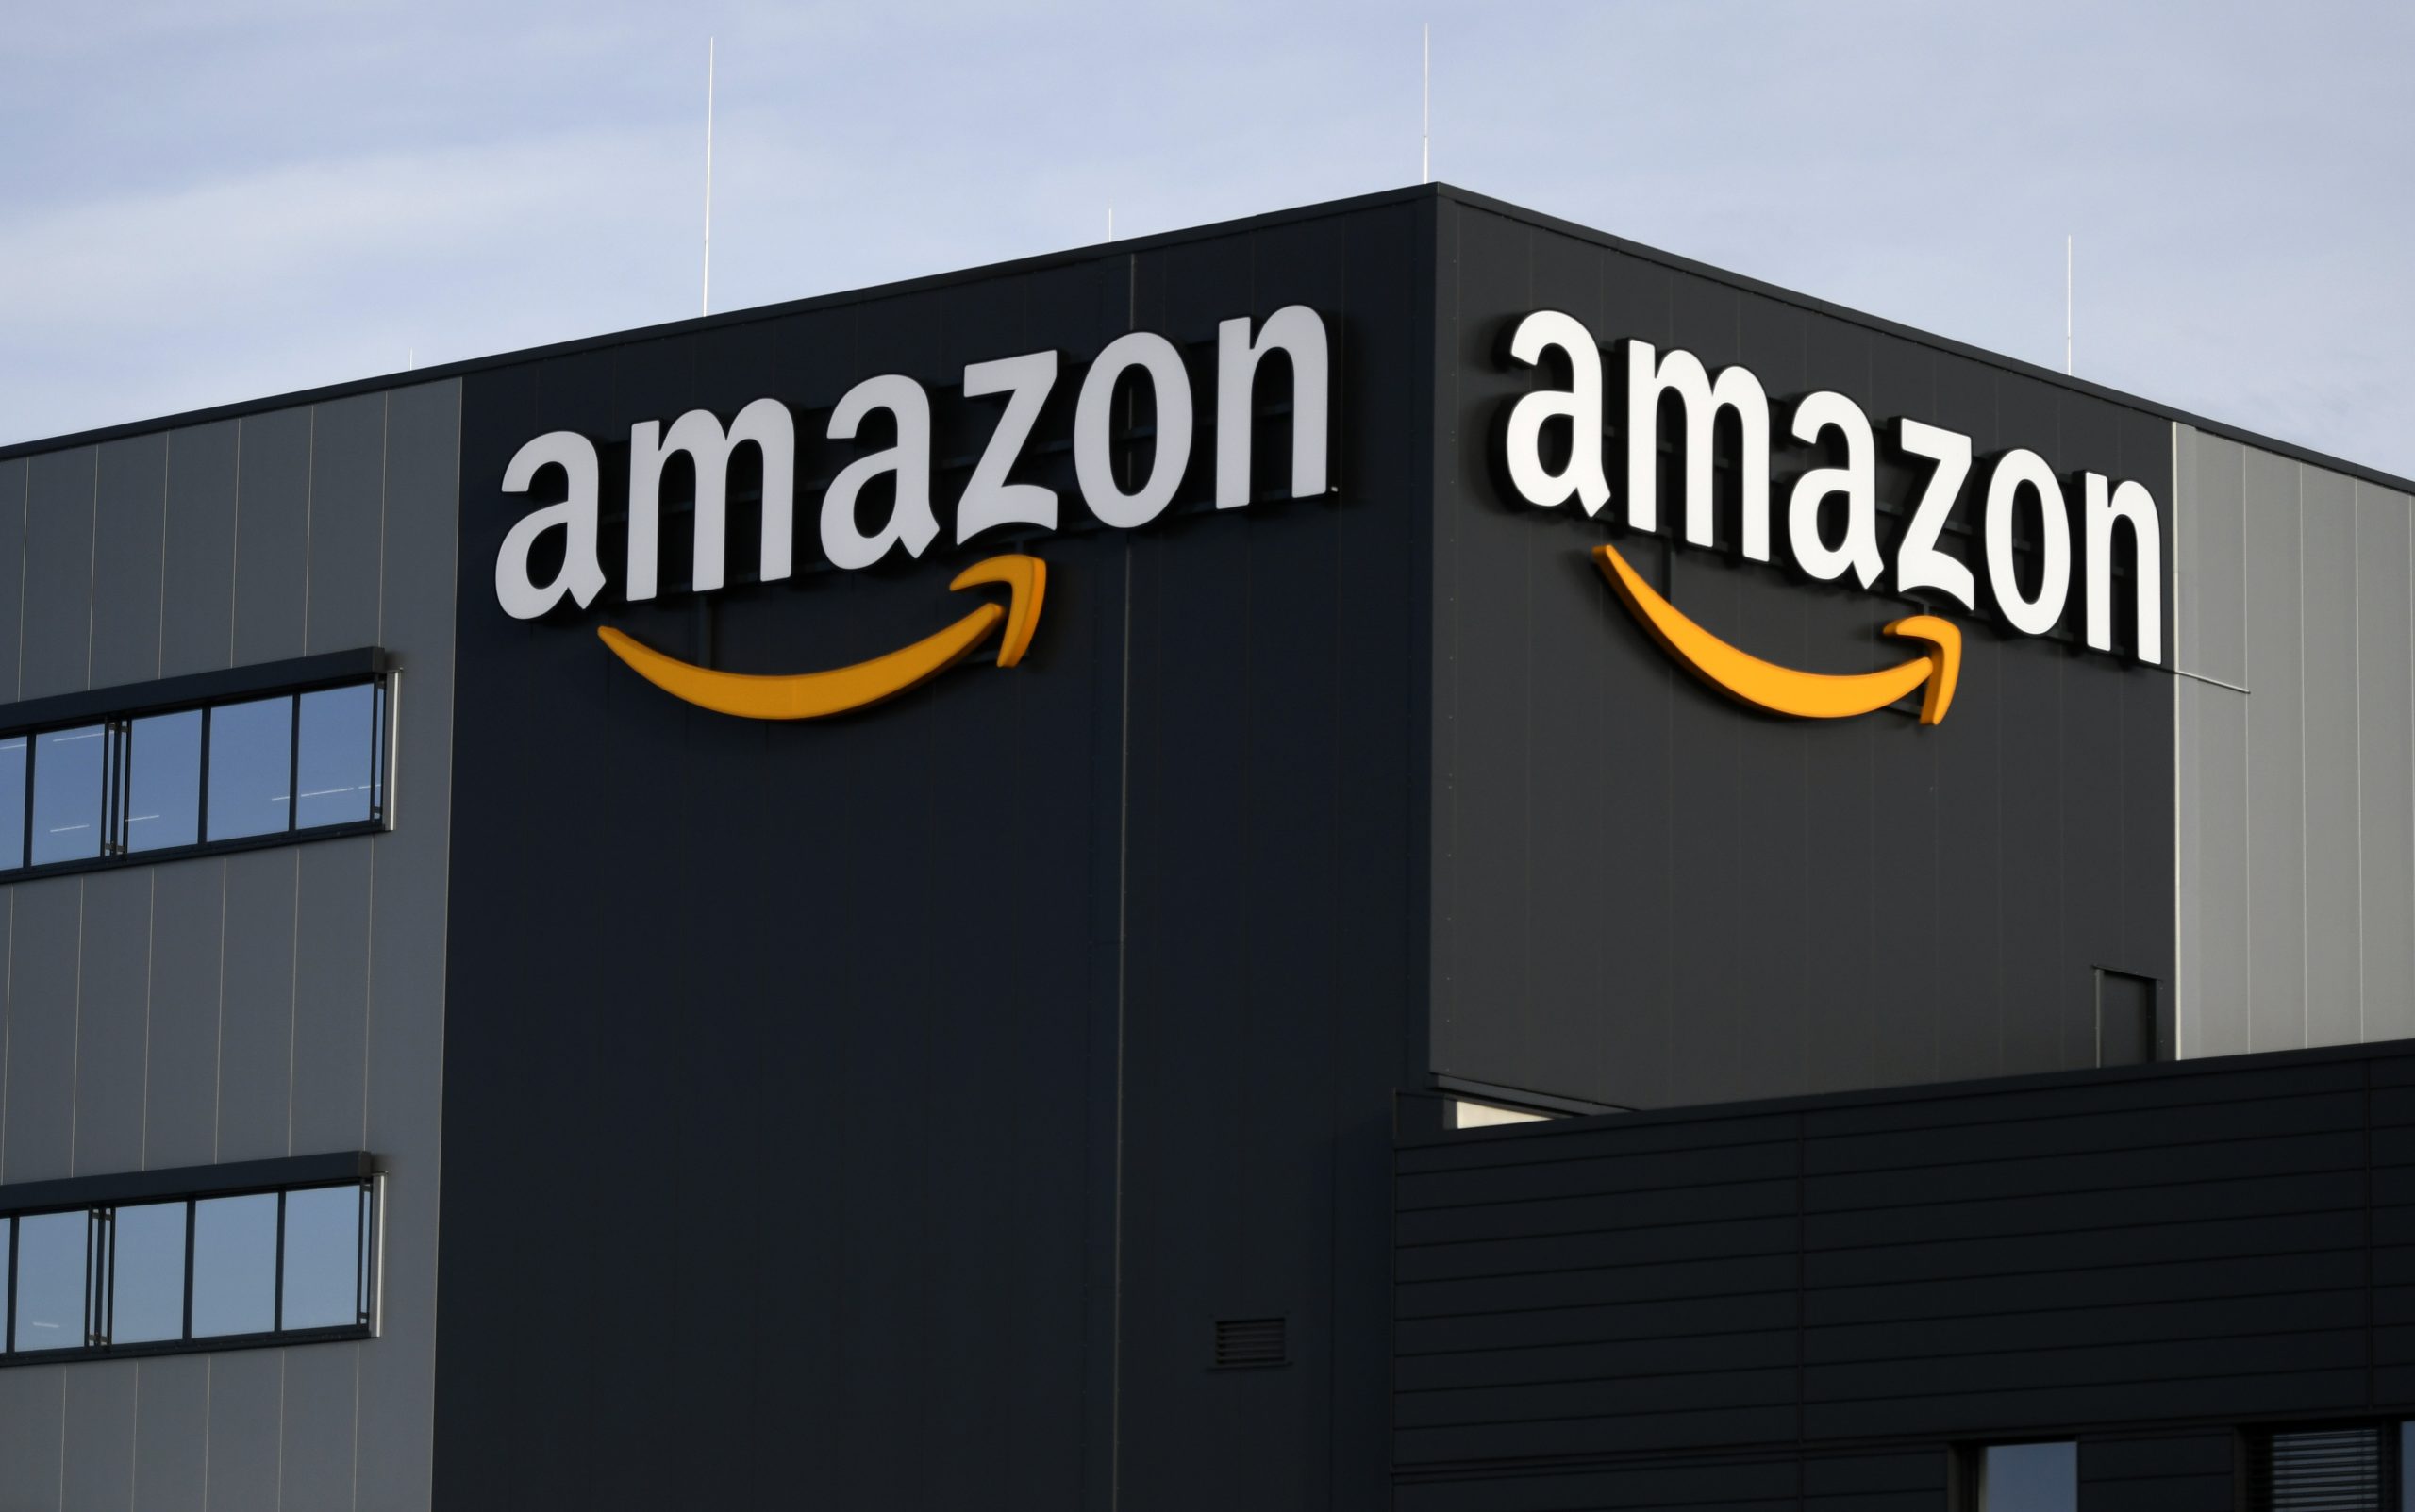 (FILES) In this file photo taken on December 17, 2019 This picture shows the logo of US online retail giant Amazon at the distribution centre in Moenchengladbach, western Germany. – Labor unions are urging regulators to investigate whether US tech giant Amazon is abusing its dominance in online retail, cloud computing and logistics. In a petition filed on February 27, 2020 with the Federal Trade Commission, the International Brotherhood of Teamsters and other labor groups claiming to represent a total of 5.3 million workers accused Amazon of anticompetitive practics. (Photo by INA FASSBENDER / AFP)